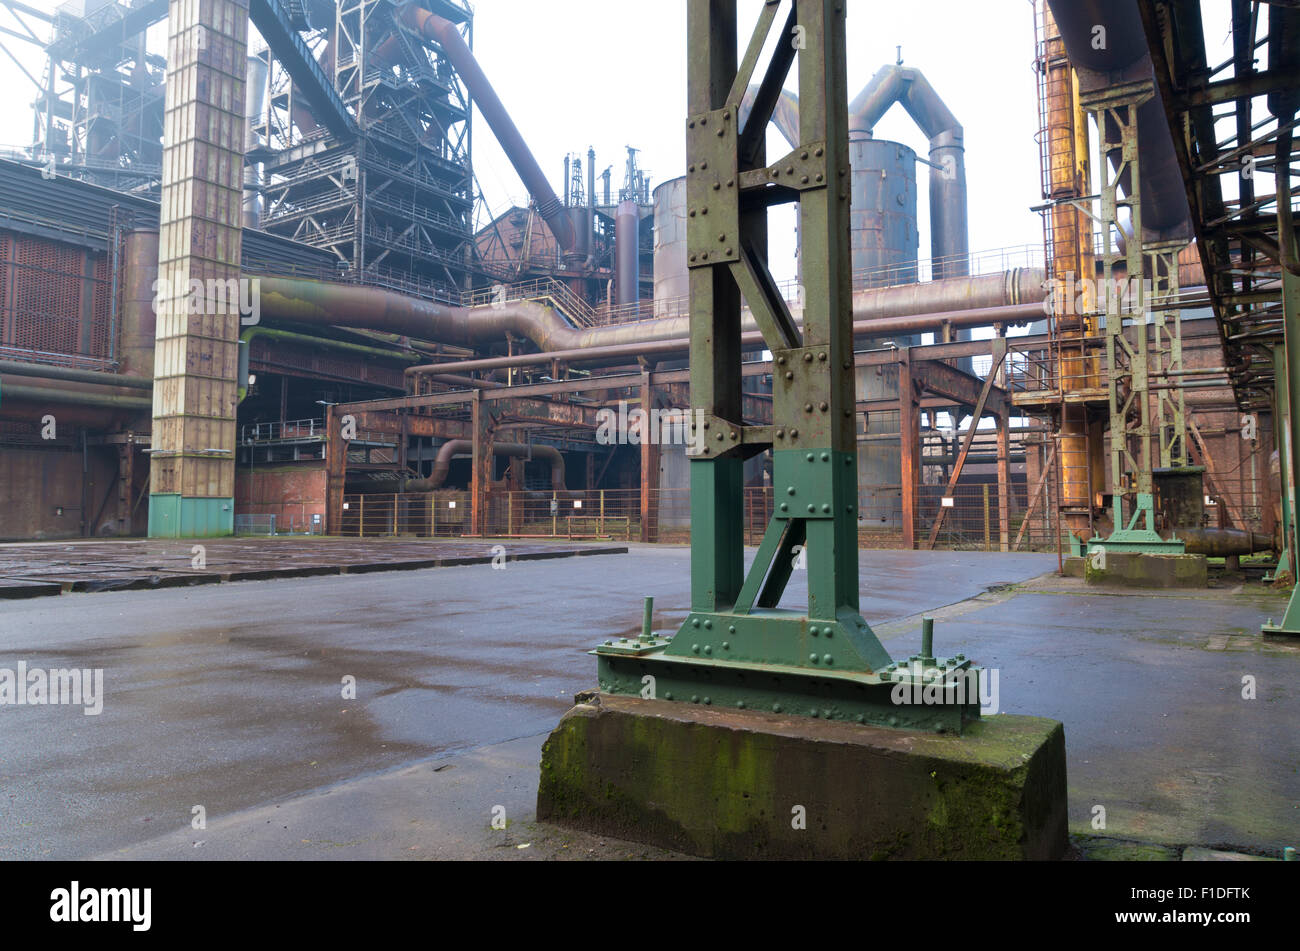 The Landschaftspark Duisburg-Nord is a public park in the German city of Duisburg. The centerpiece of the park is formed by the Stock Photo